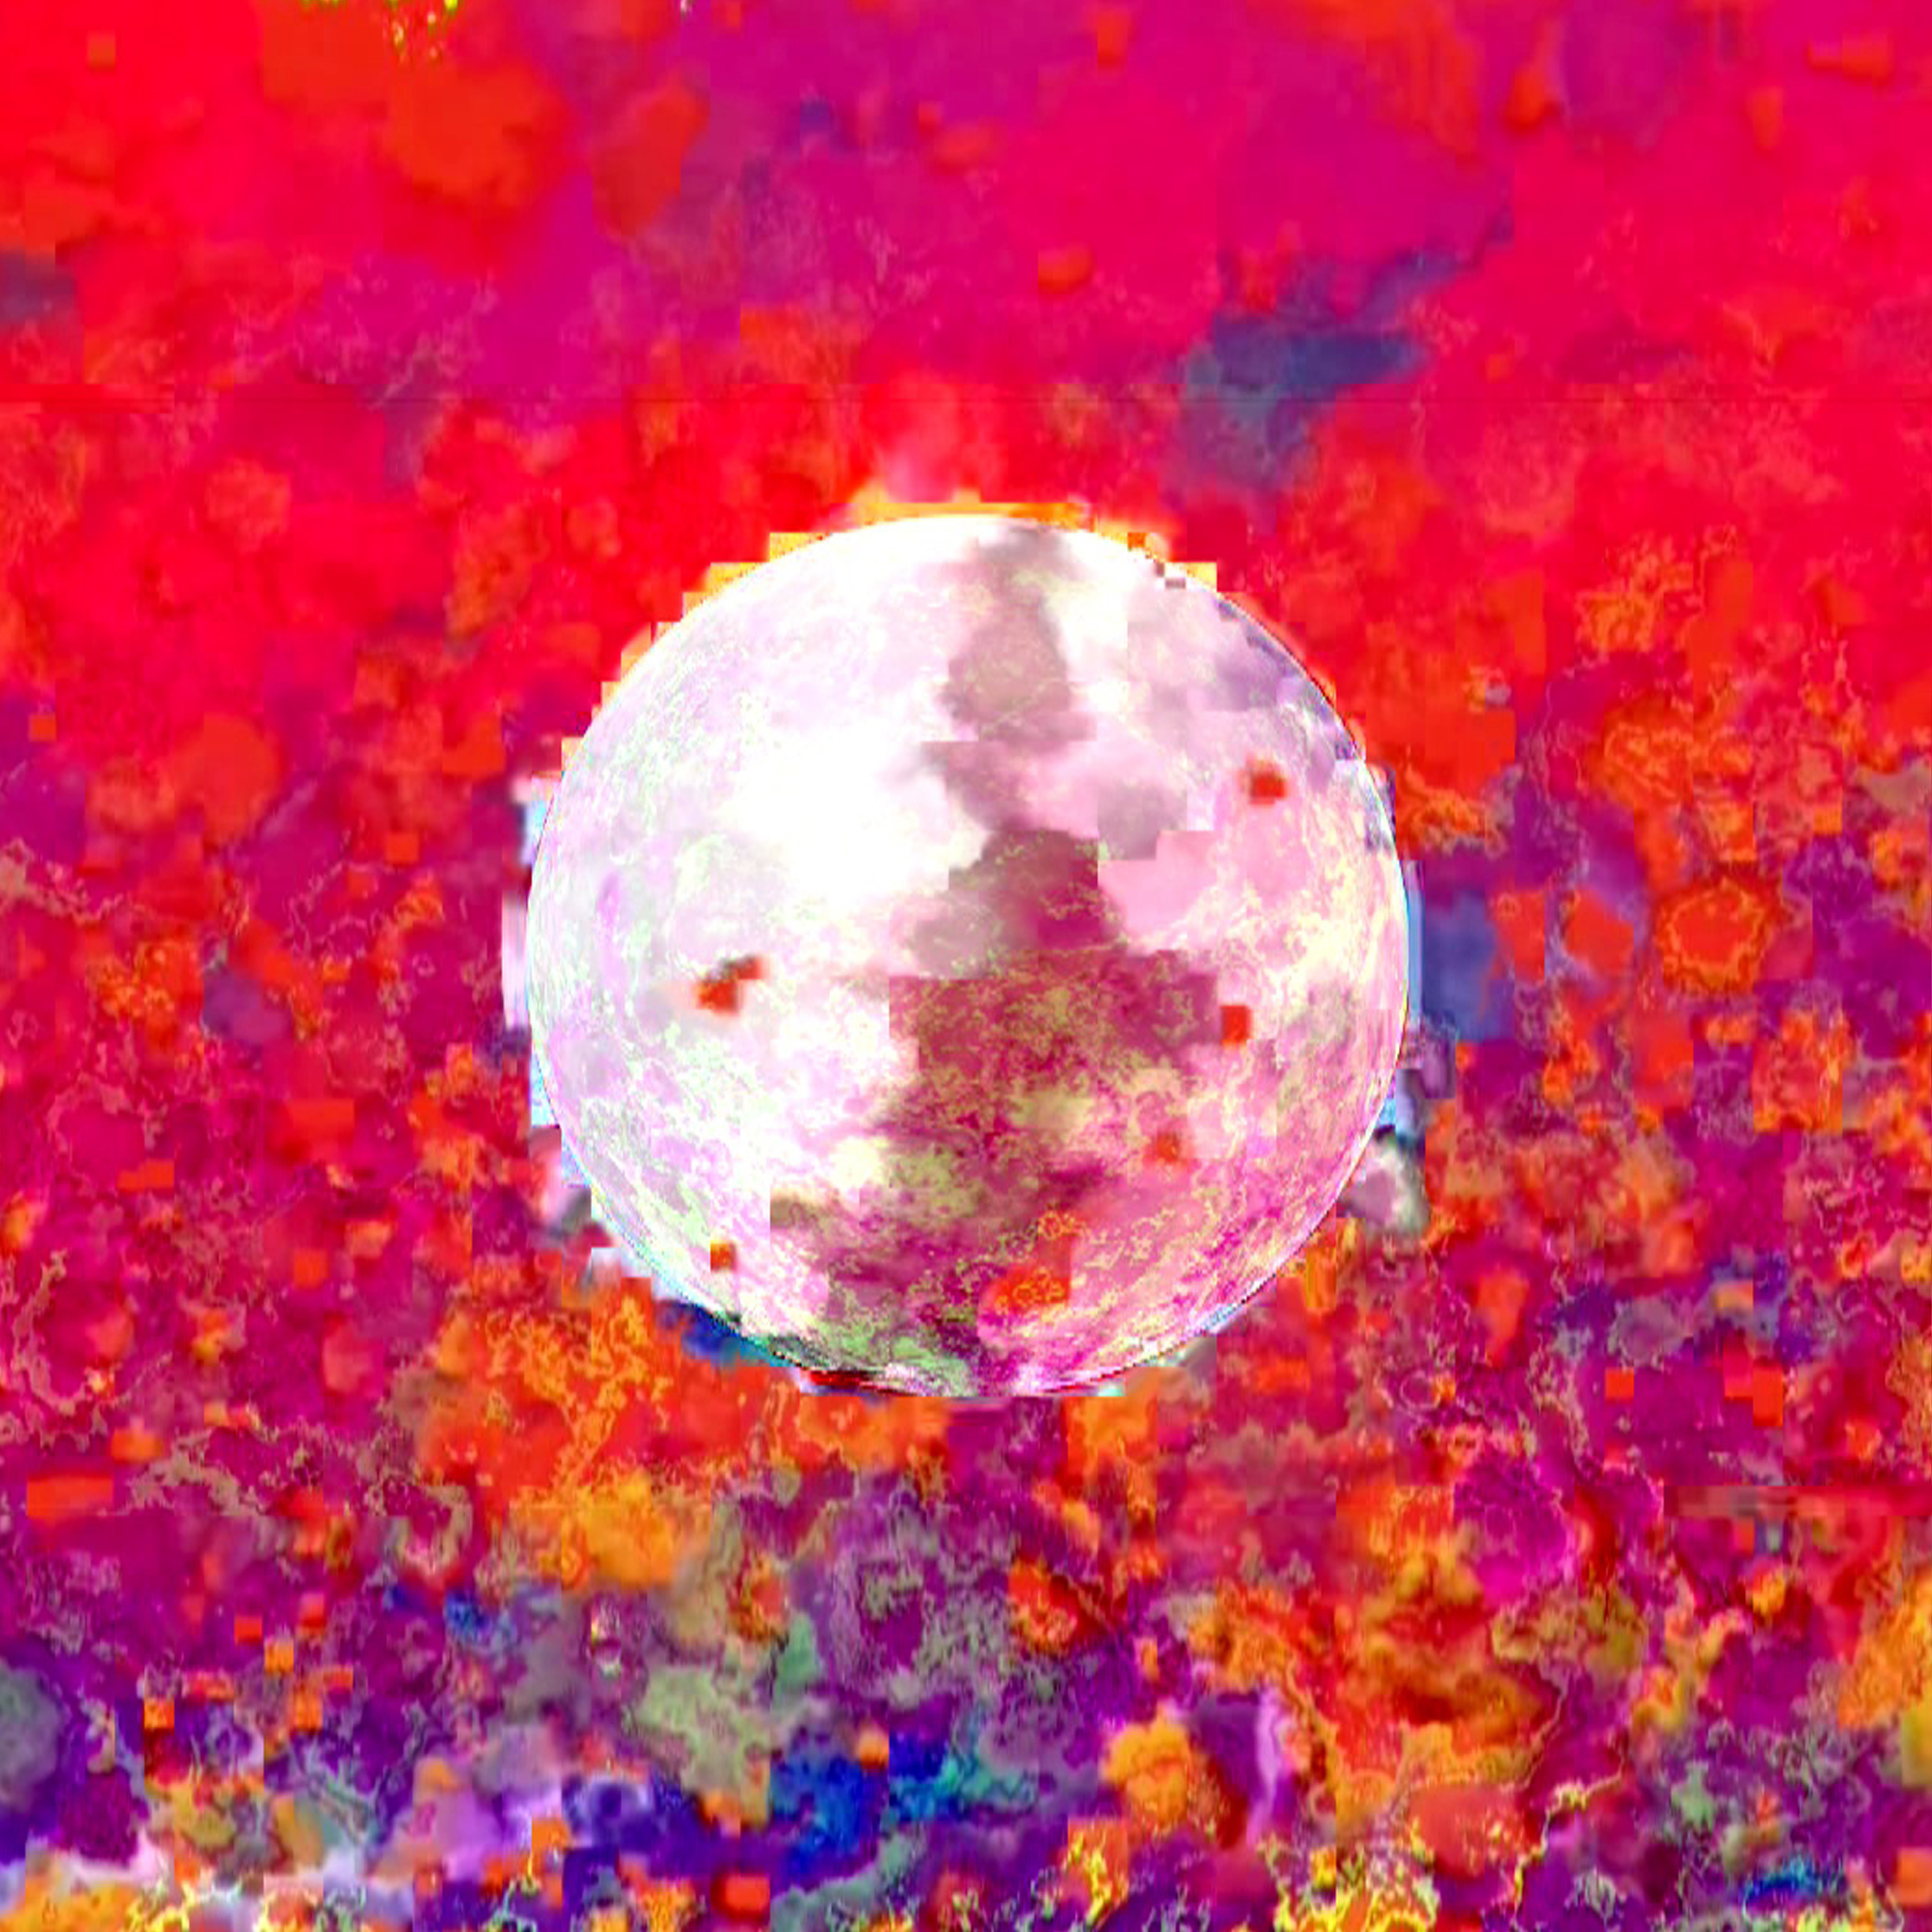 Detail from the digital film showing a pixelated image of a globe